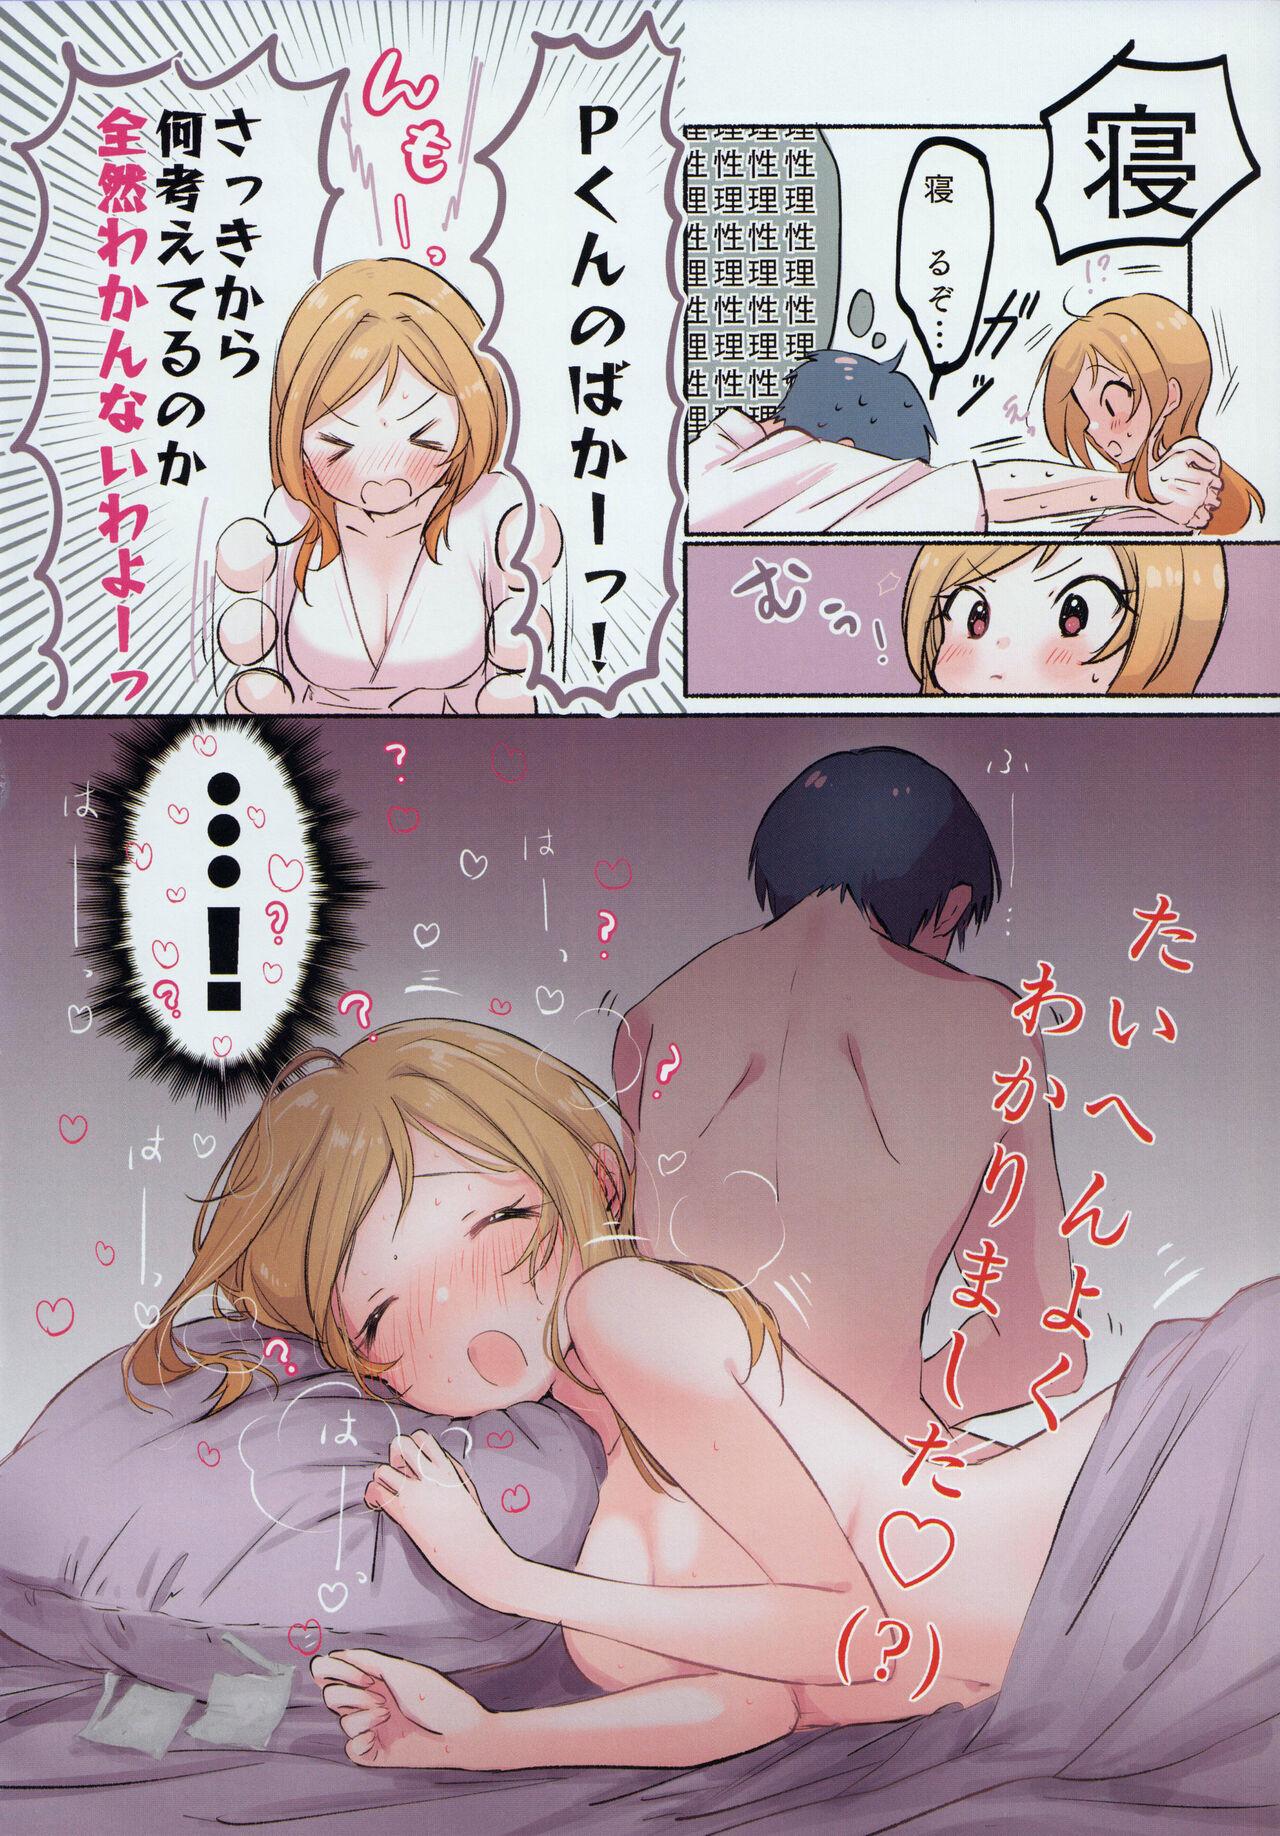 Dad By the way, Producer-kun, what do people do at a love hotel? - The idolmaster For - Page 5